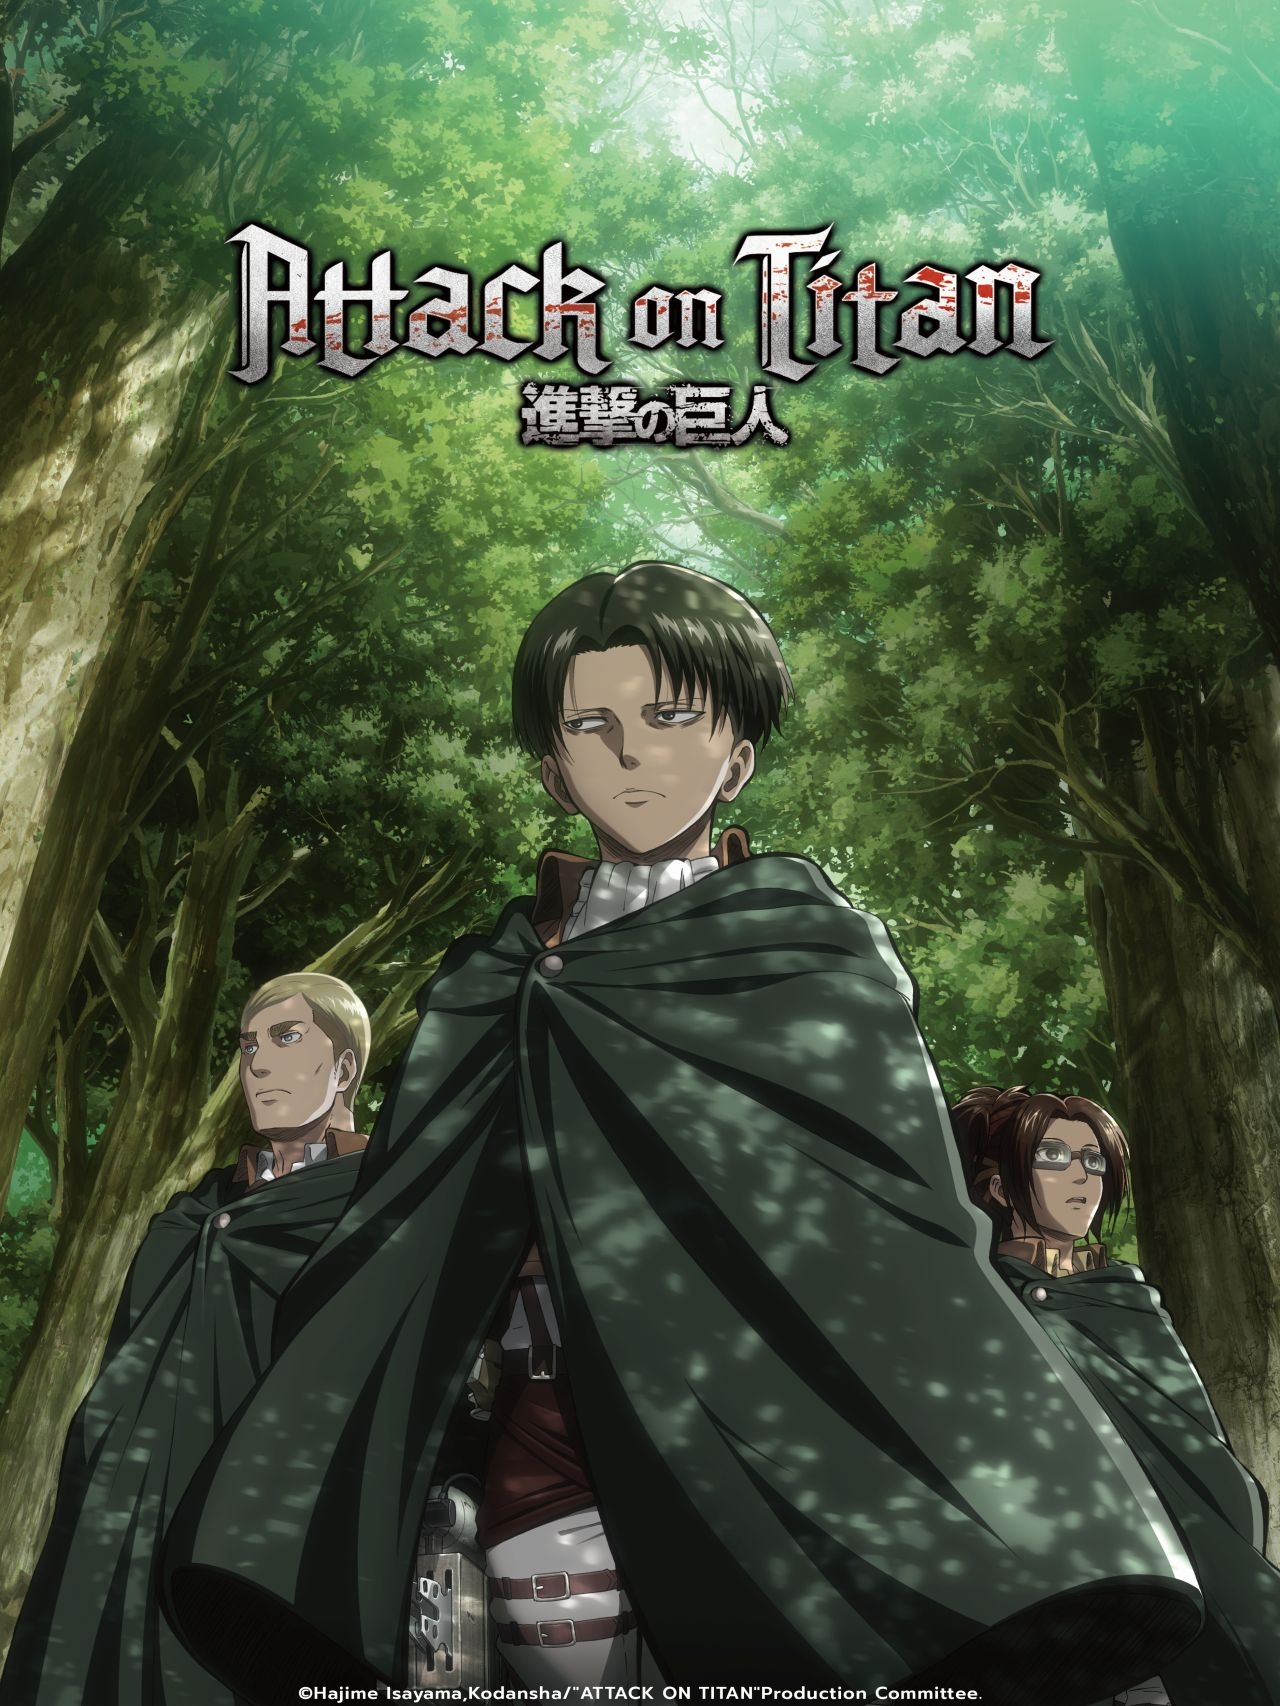 Attack on Titan' Final Season Special Launches on Crunchyroll